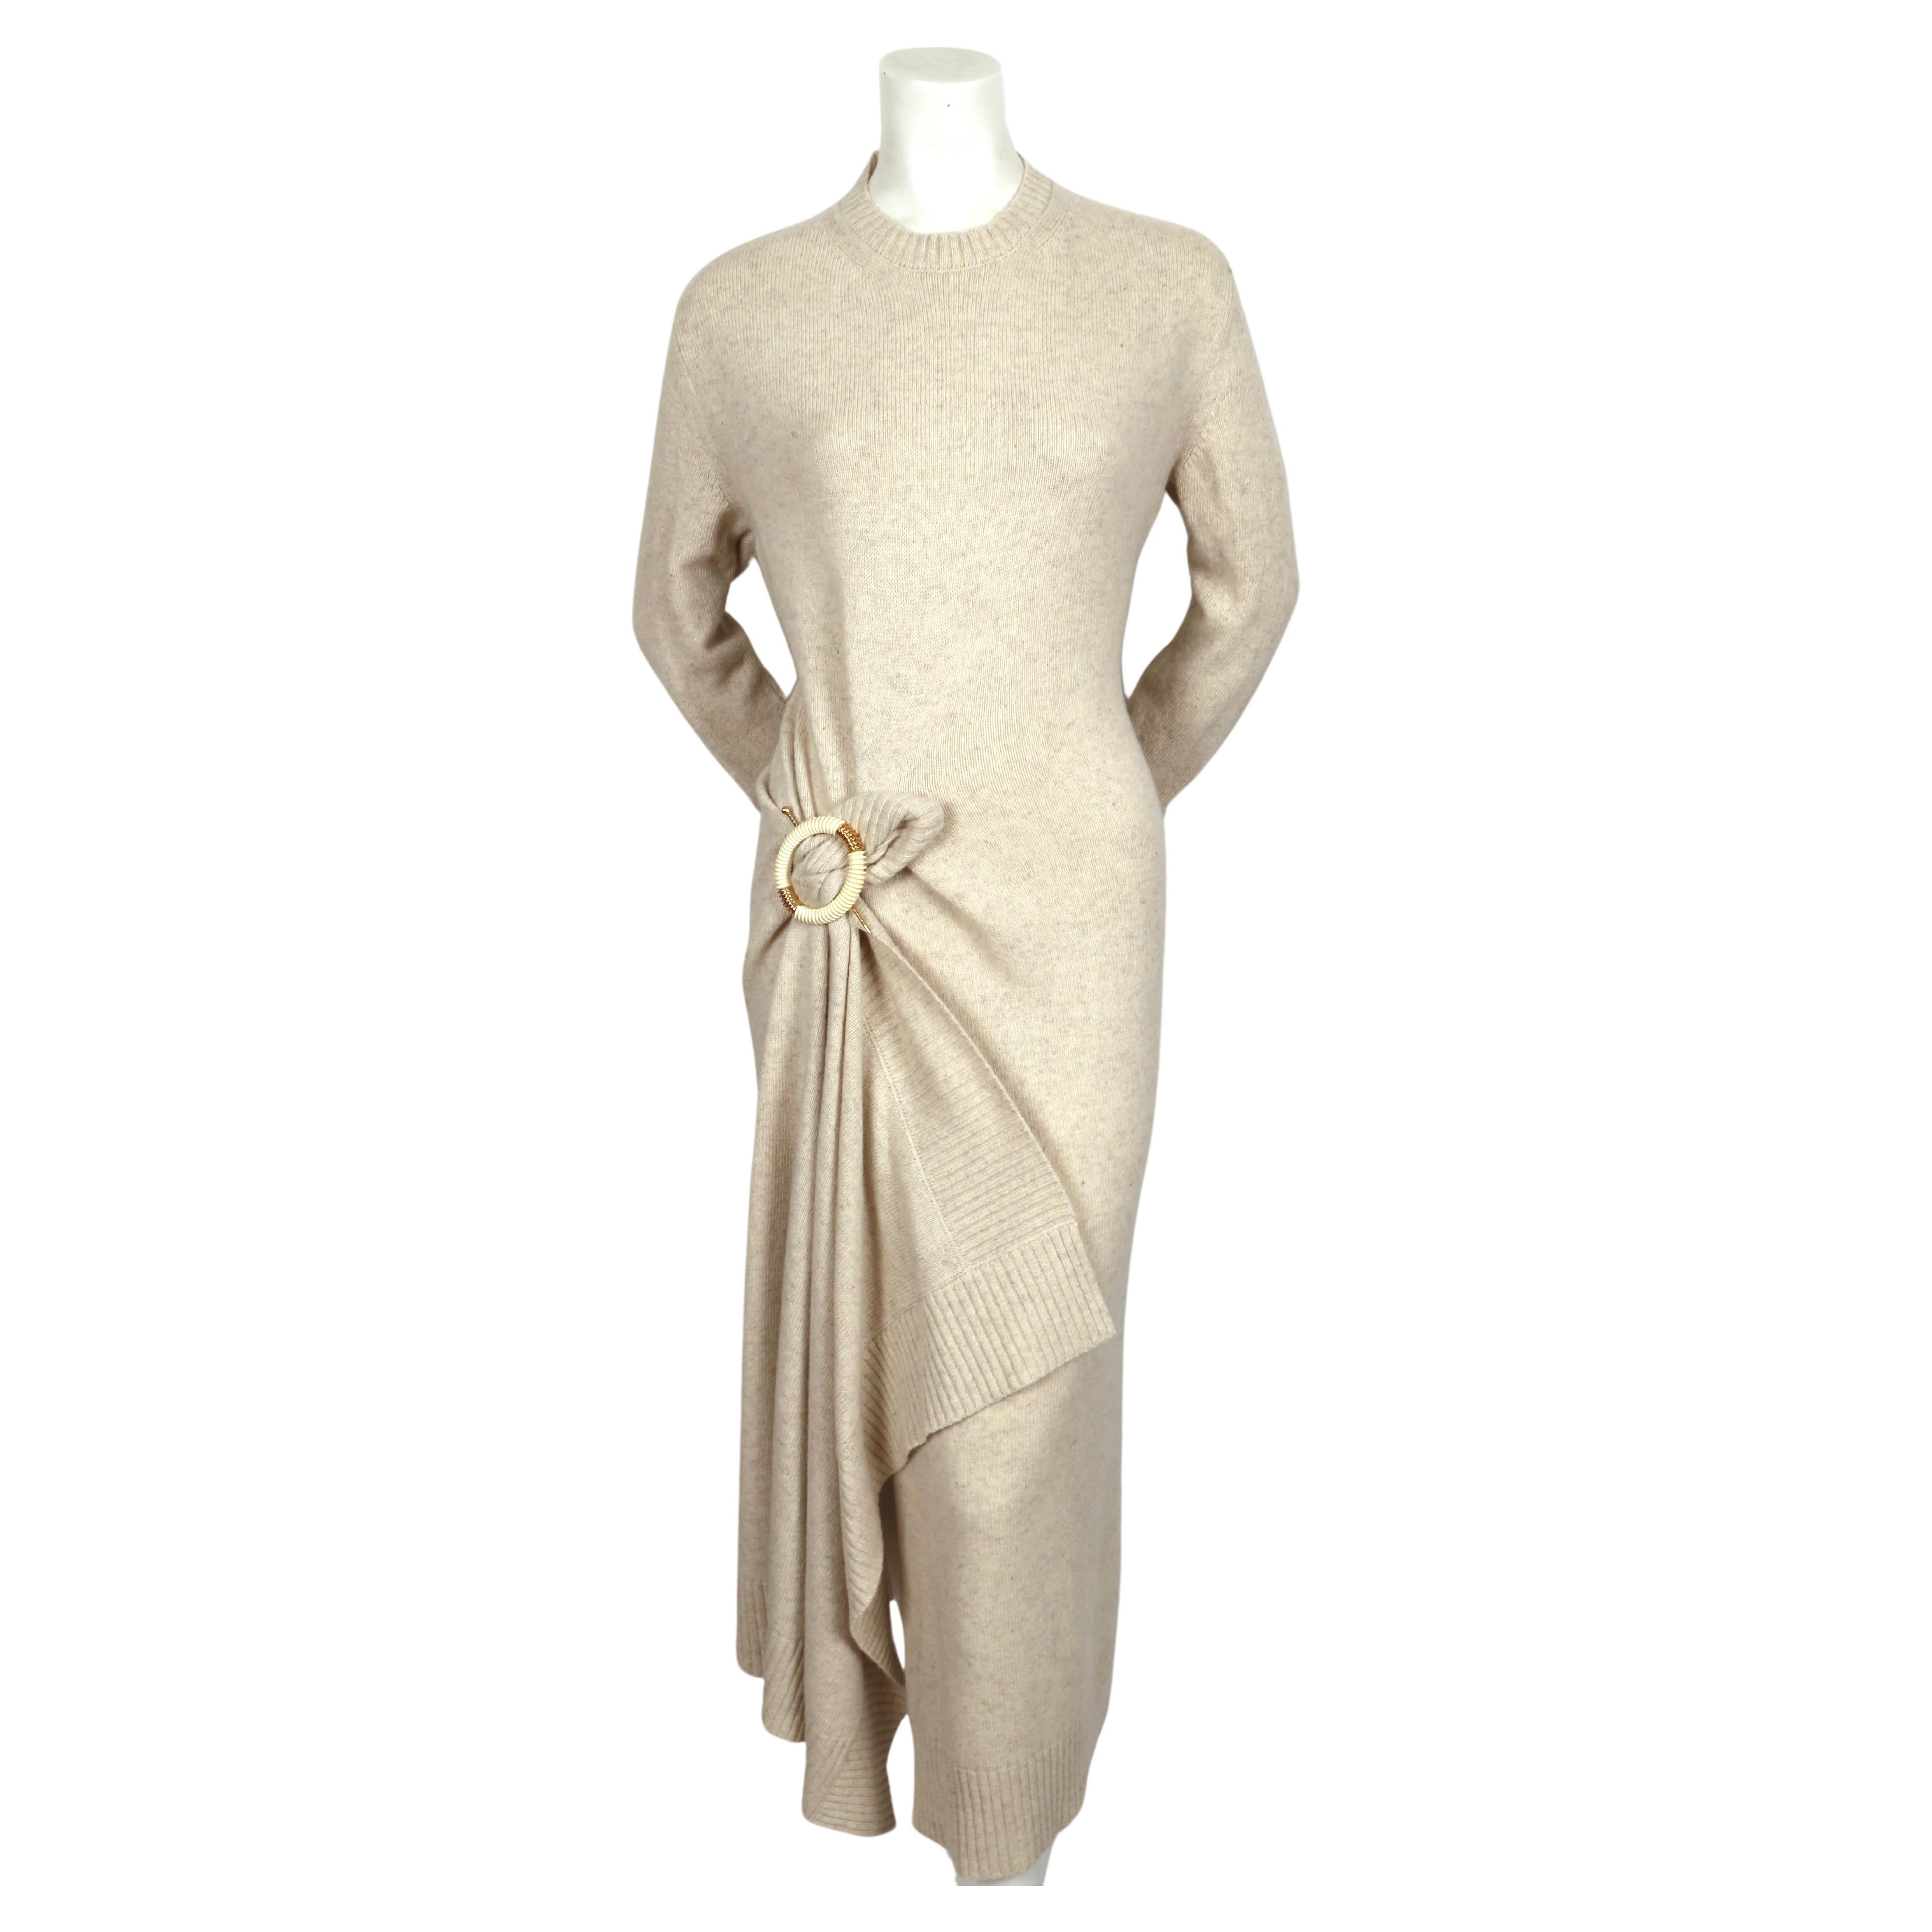 Fuzzy, beige, draped sweater dress with decorative brooch designed by Phoebe Philo for Celine dating to fall of 2018. Highly sought after piece from Phobe Philo's time at Celine. Dress is labeled a Size XS but also fits a S due to oversized cut. 